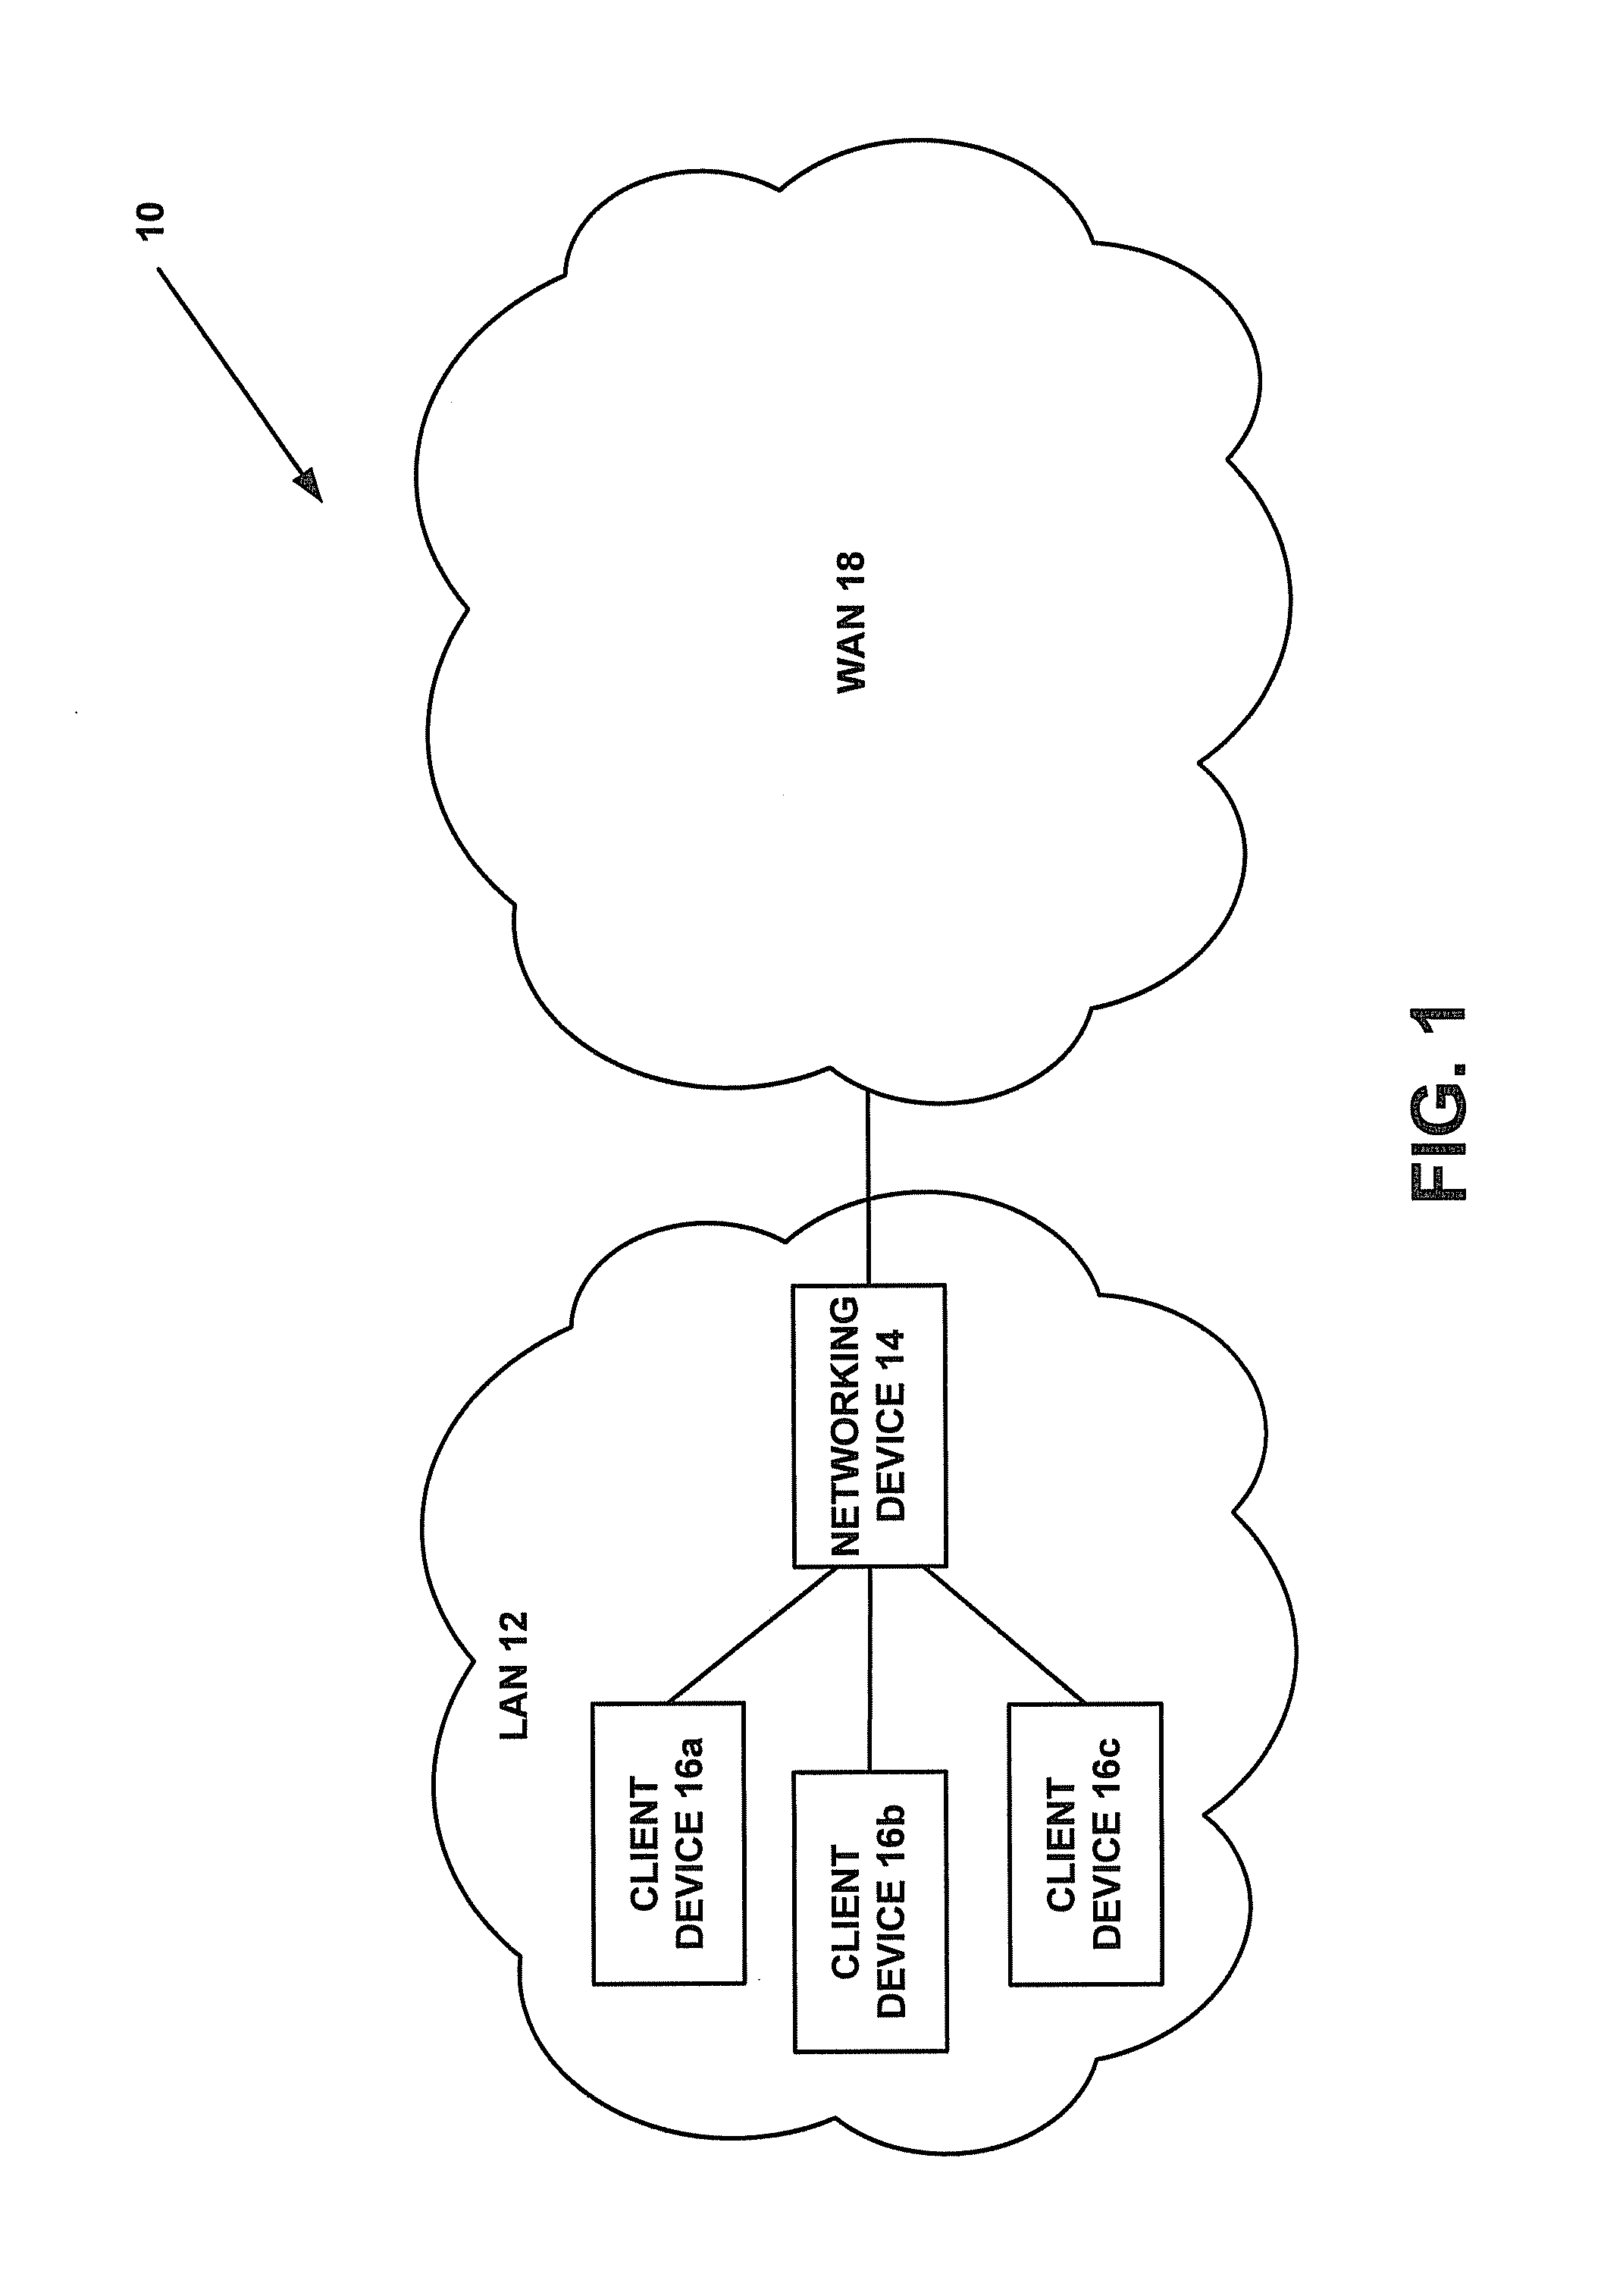 System and Method of Accessing Resources in a Computer Network